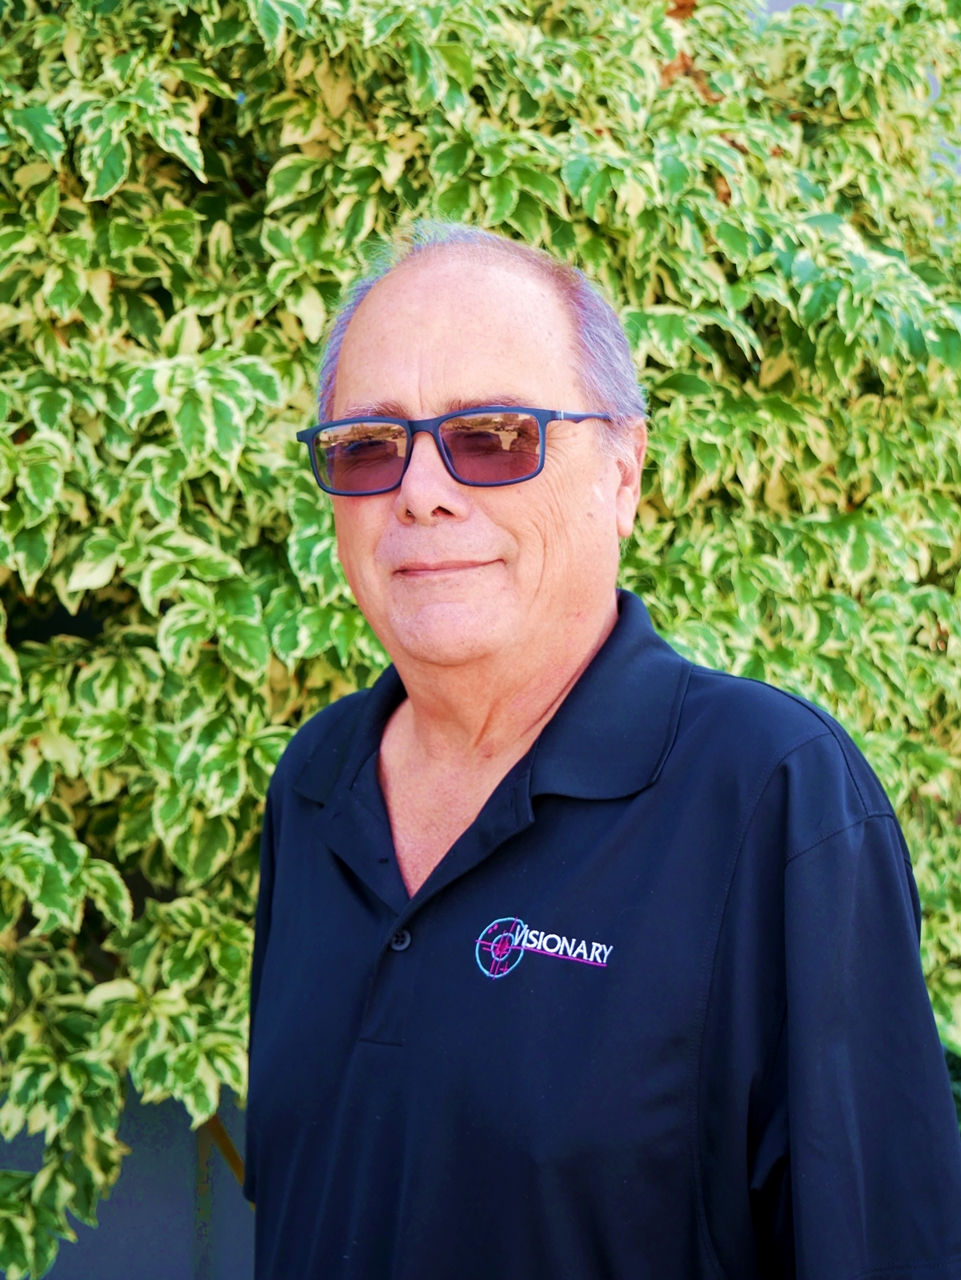 Man with glasses and grey hair standing in front of green bushes and a grey wall.